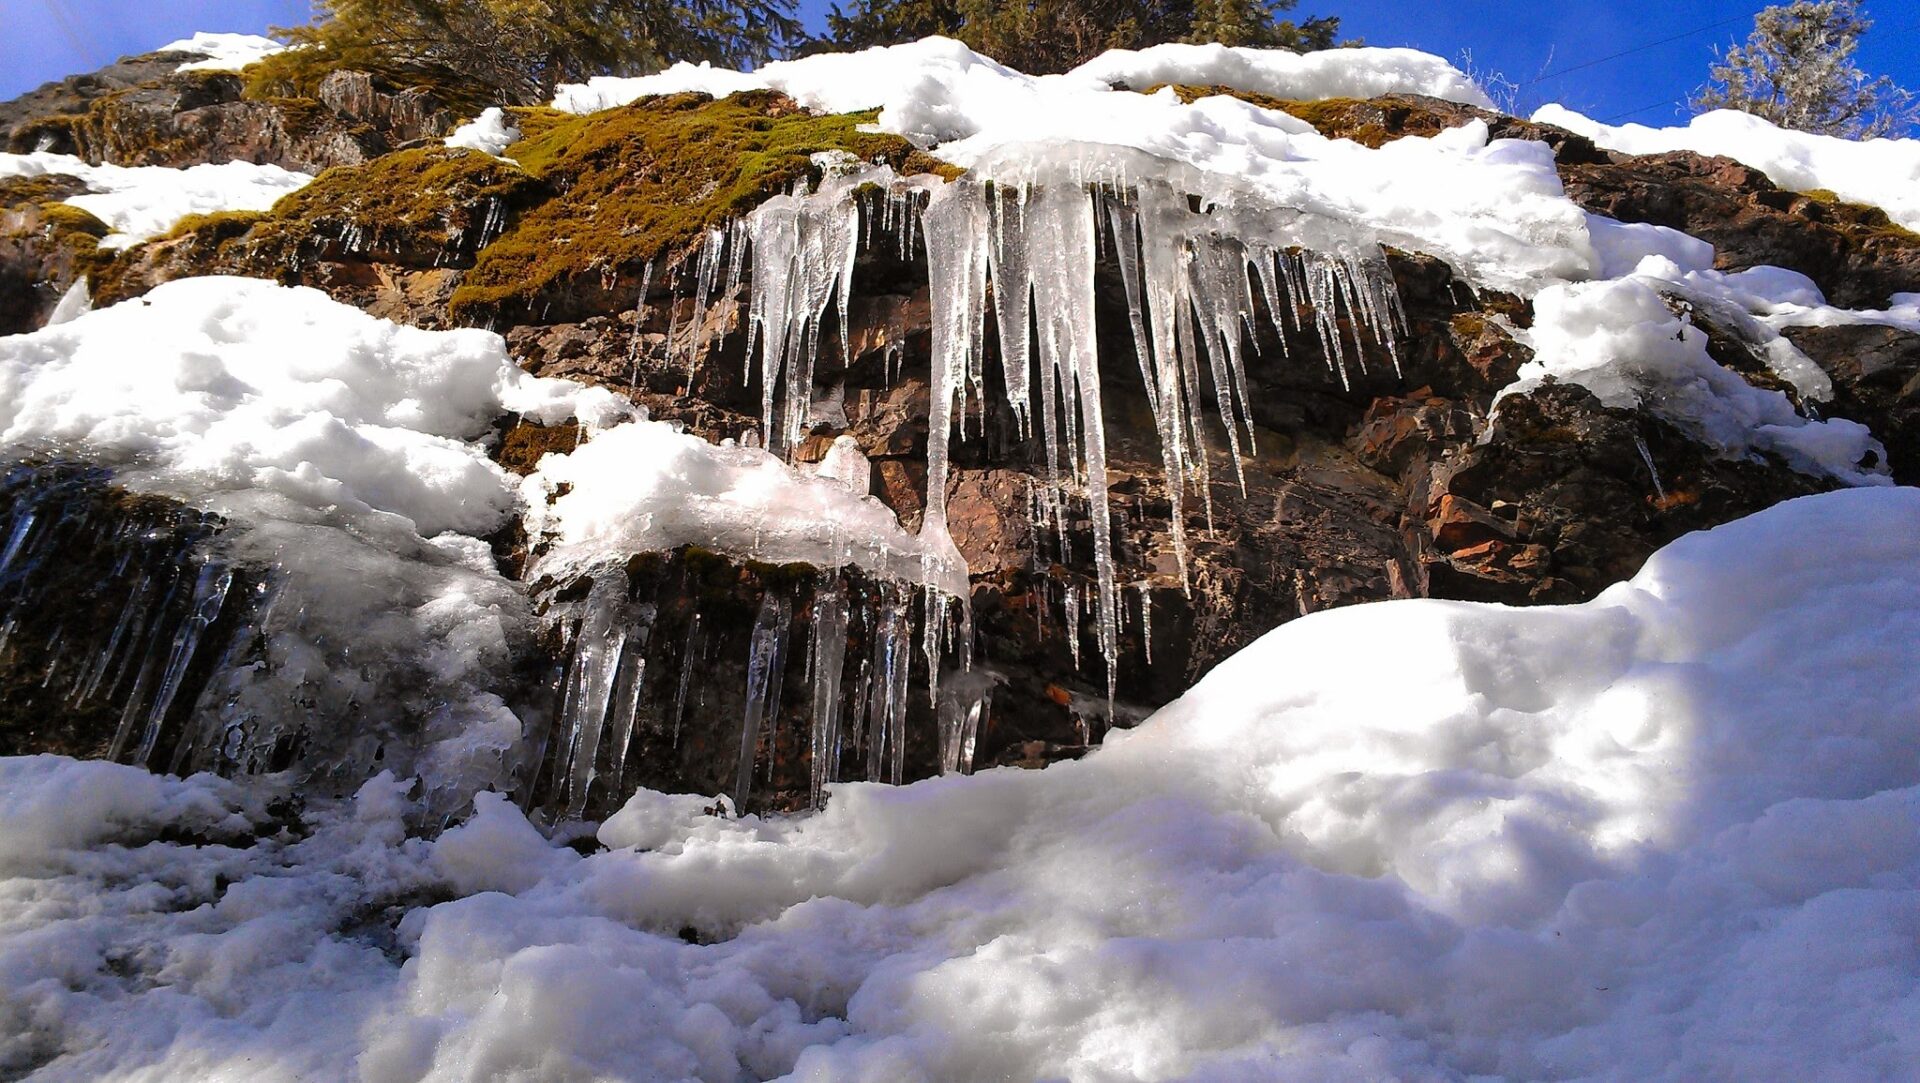 Big icicles hang from snowy rocks